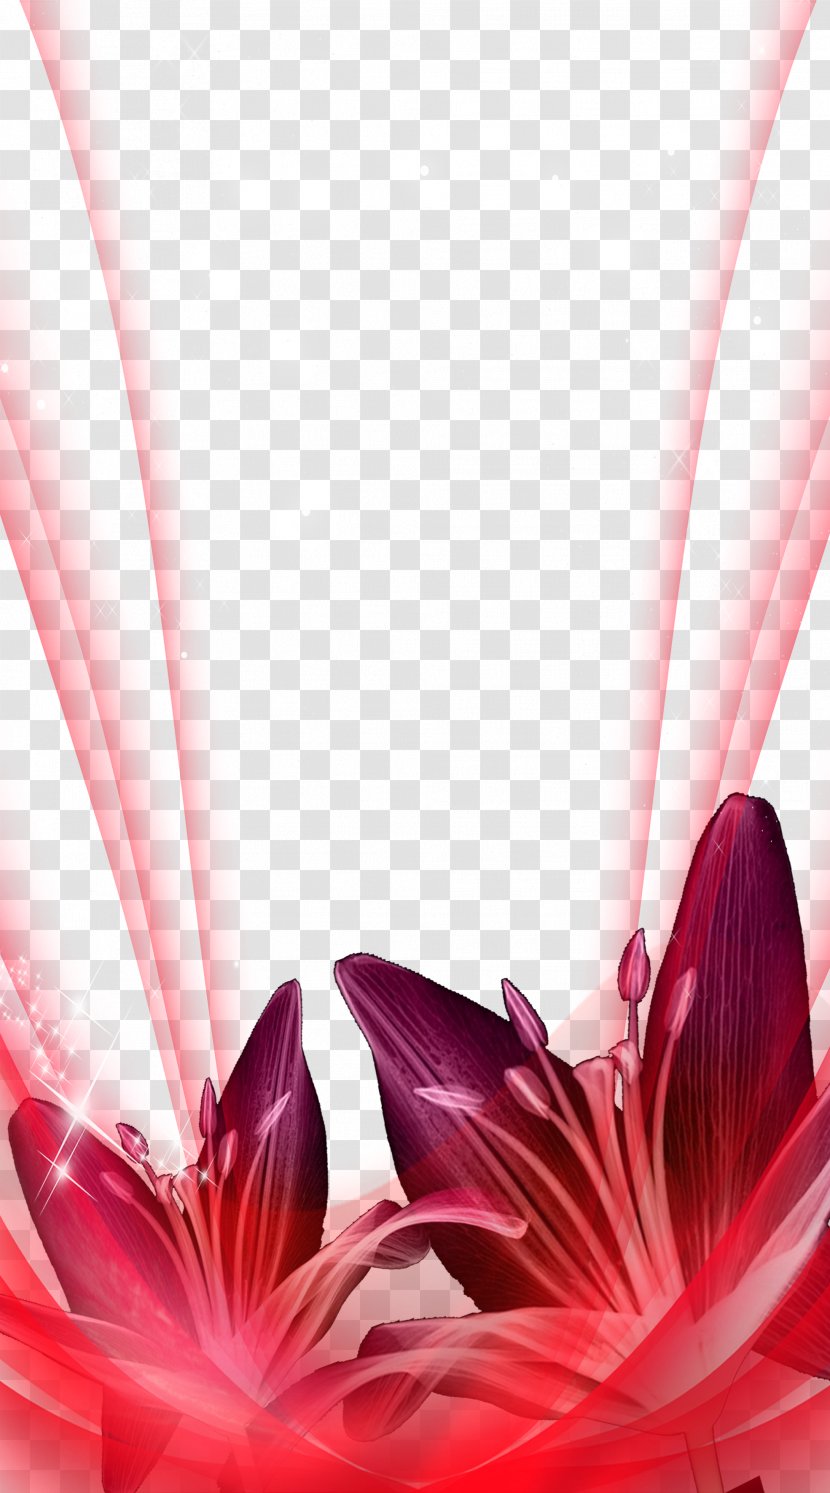 Red Wallpaper - Dahlia - Beautiful Tulips Background Material Transparent PNG